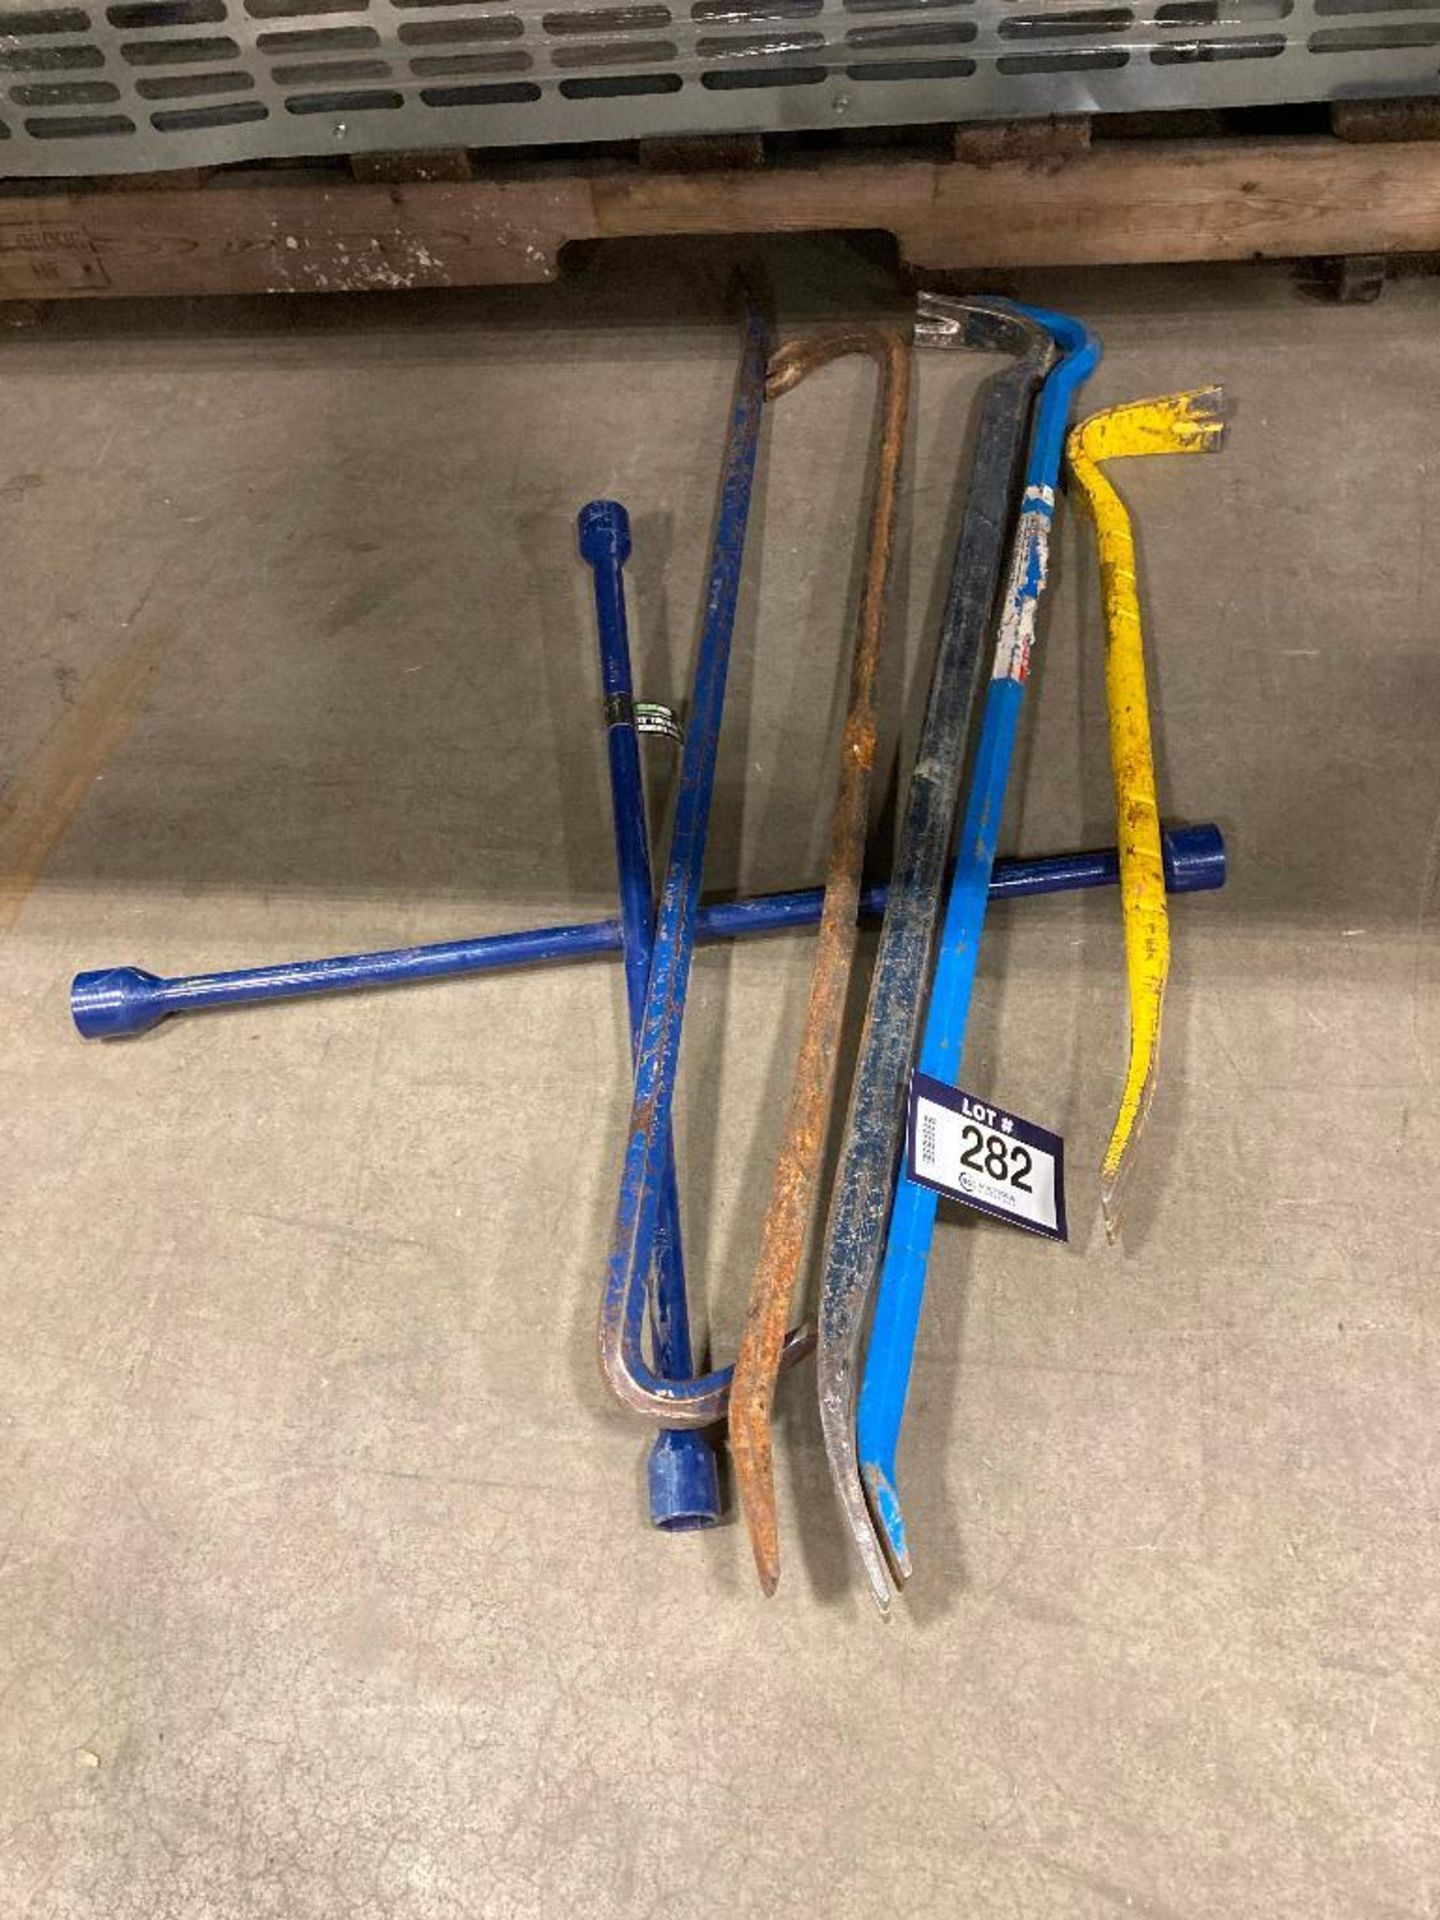 Lot of (4) Asst. Crowbars & (1) Lug Wrench